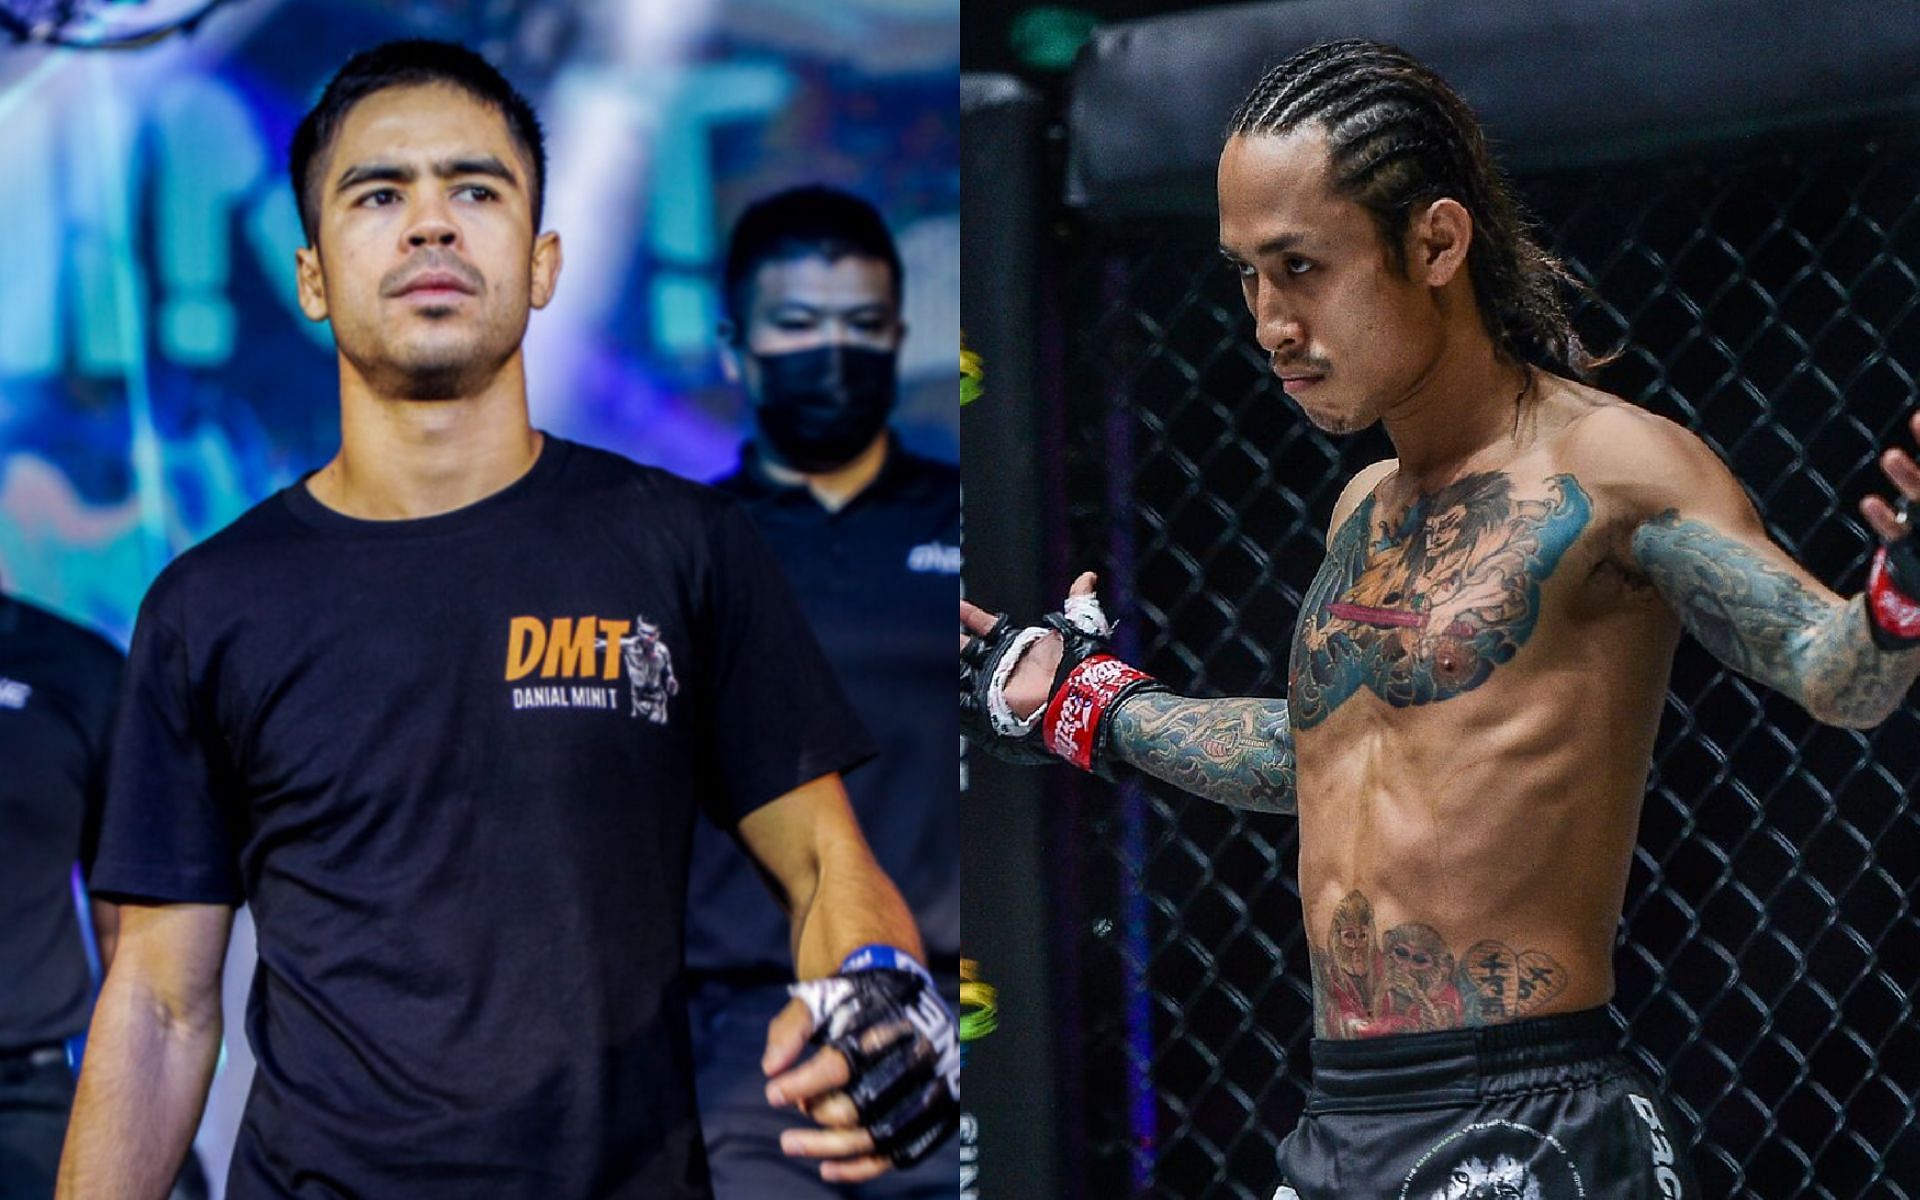 Namiki Kawahara (right) says he is living the fighter&#039;s life in preparation for his match against Danial Williams (left) at ONE 156: Eersel vs. Sadikovic. [Photos ONE Championship]